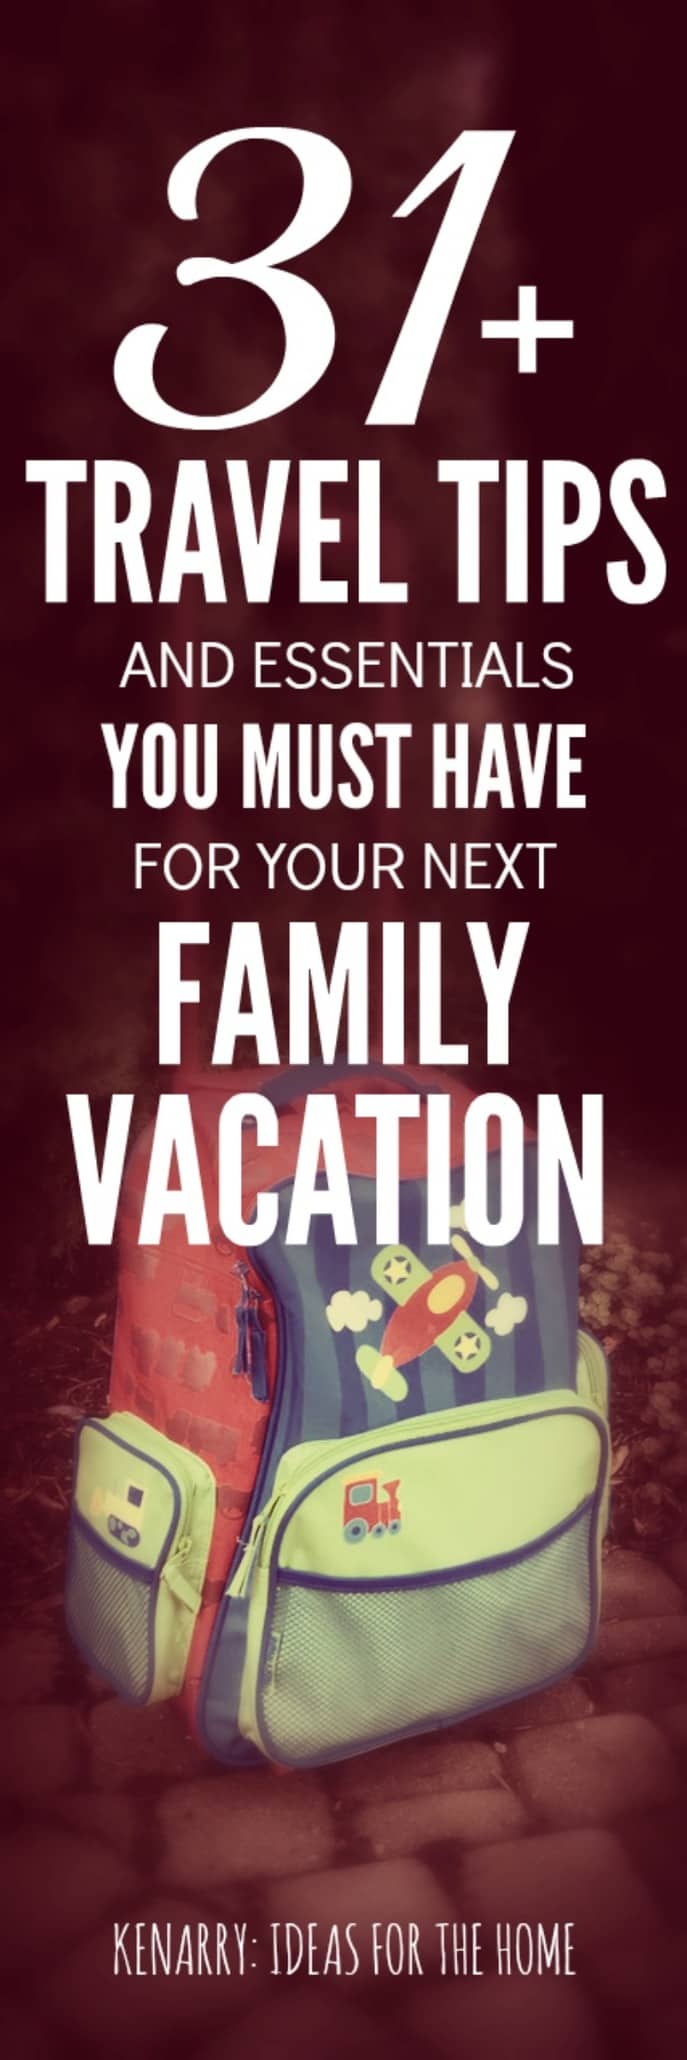 Whether your flying or driving on a road trip for your next family vacation, this list of favorite travel essentials and trip tips is a must read! It's chock full of great ideas and things you need to know as you plan your dream vacation with the kids.